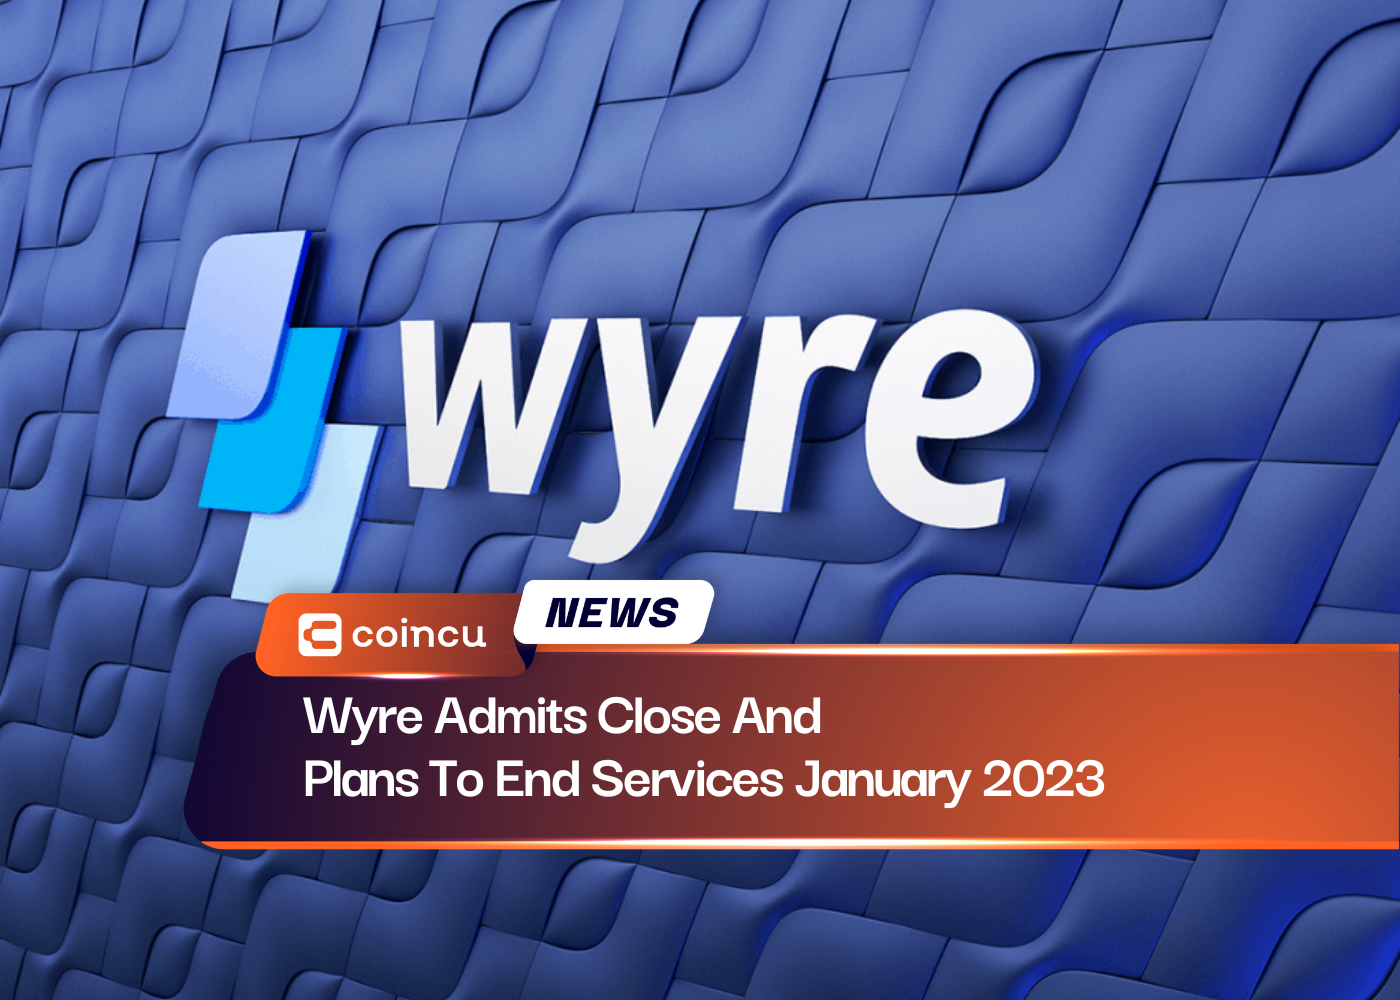 Wyre Admits Close And Plans To End Services January 2023